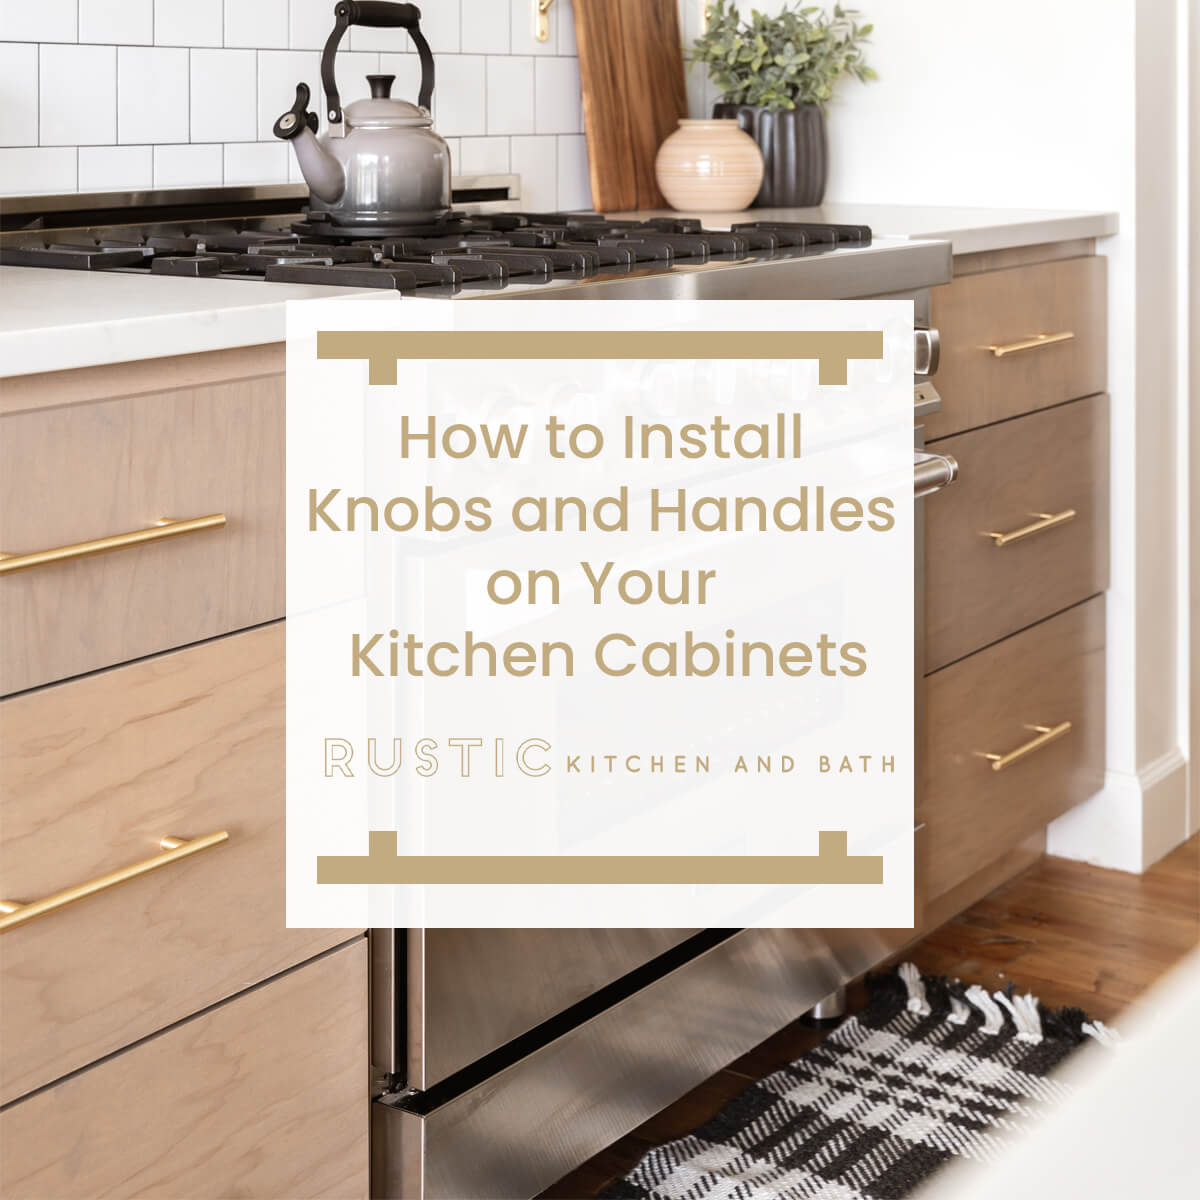 How to Install Knobs and Handles on Your Kitchen Cabinets